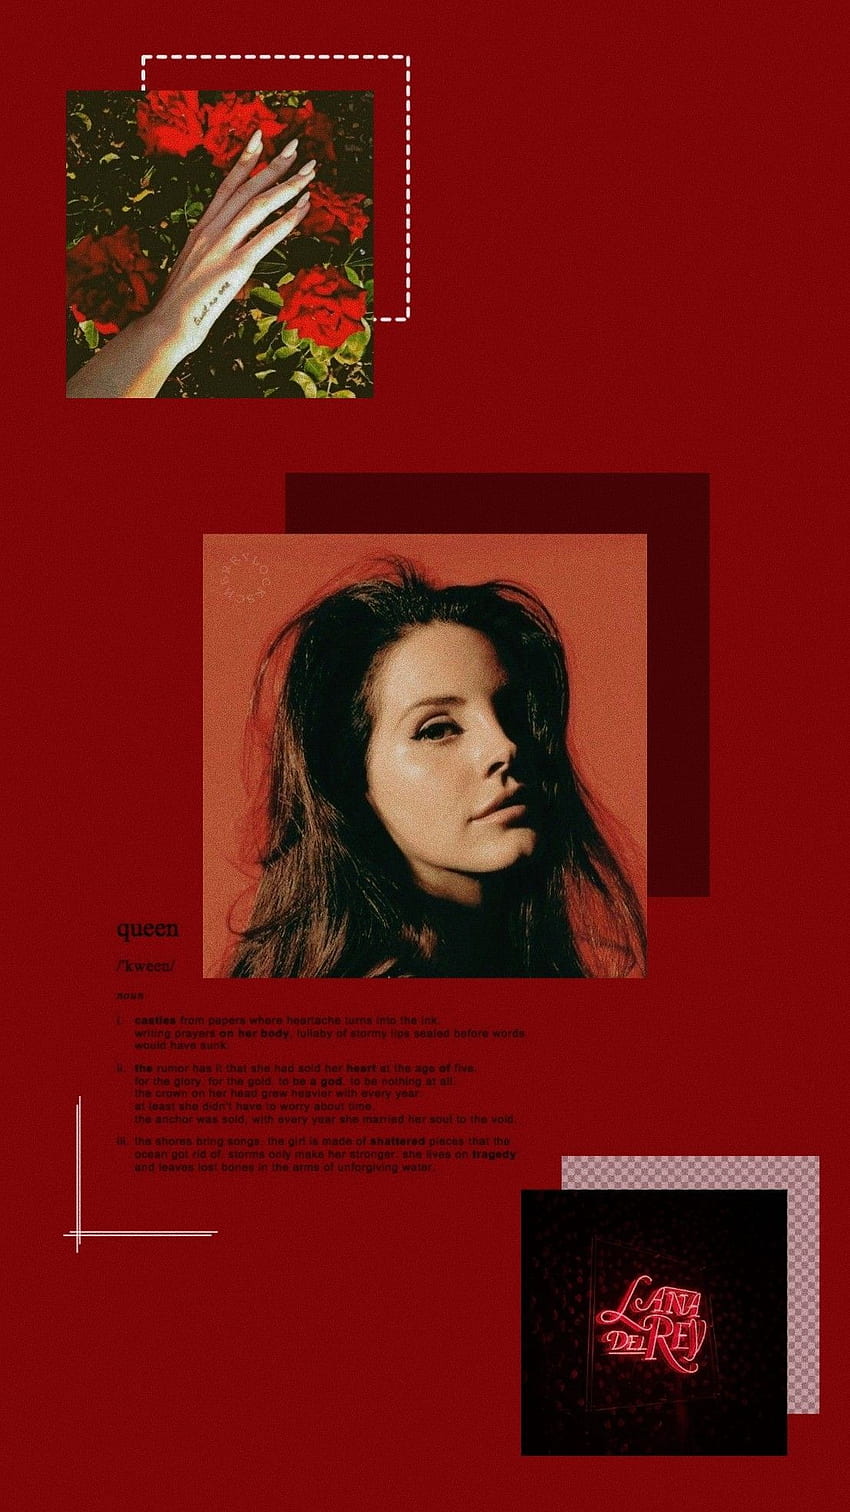 A red background with pictures of people - Lana Del Rey